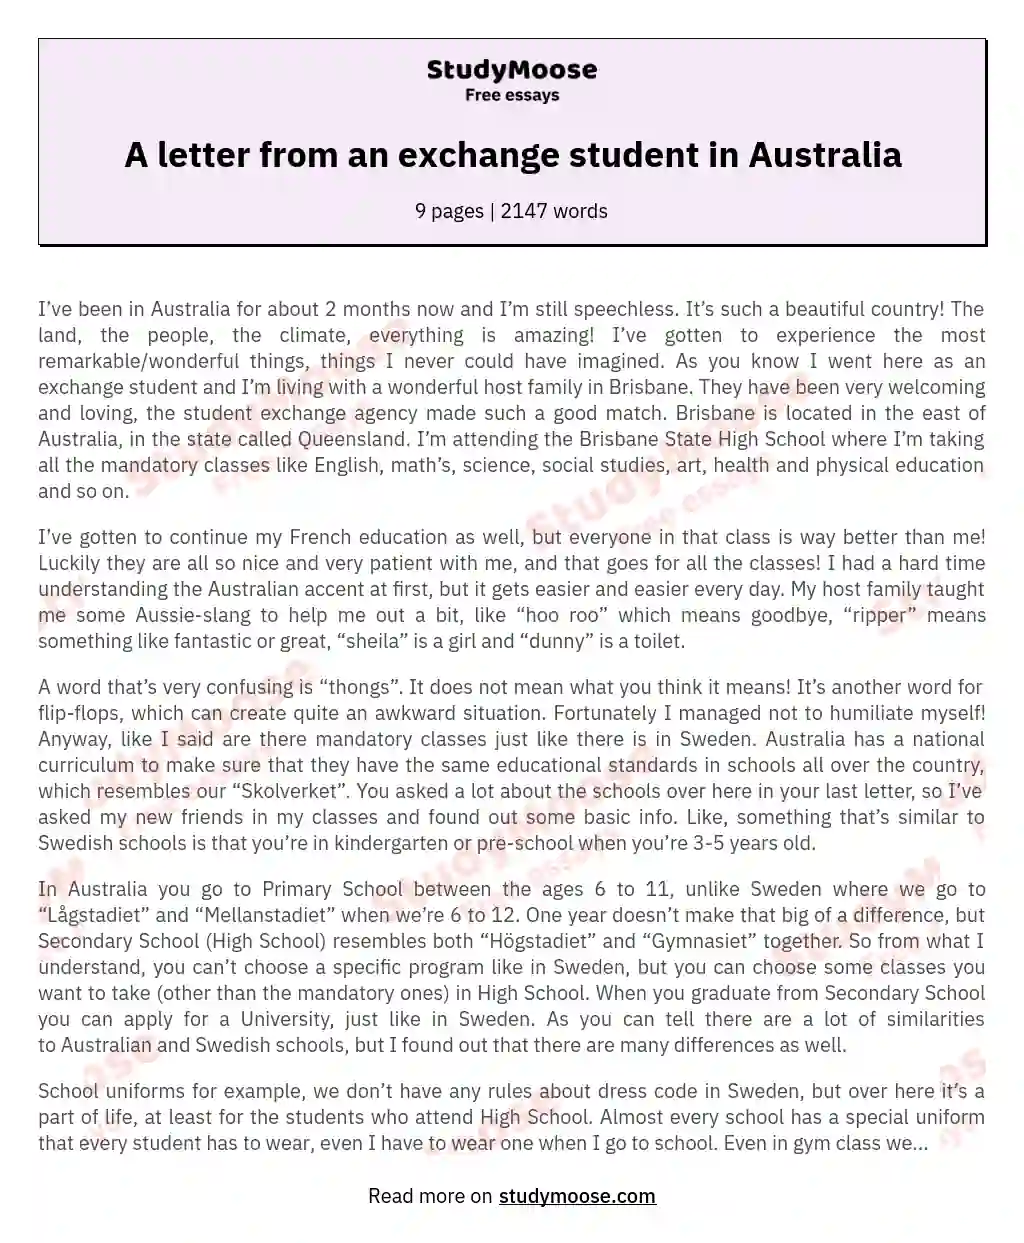 A letter from an exchange student in Australia essay